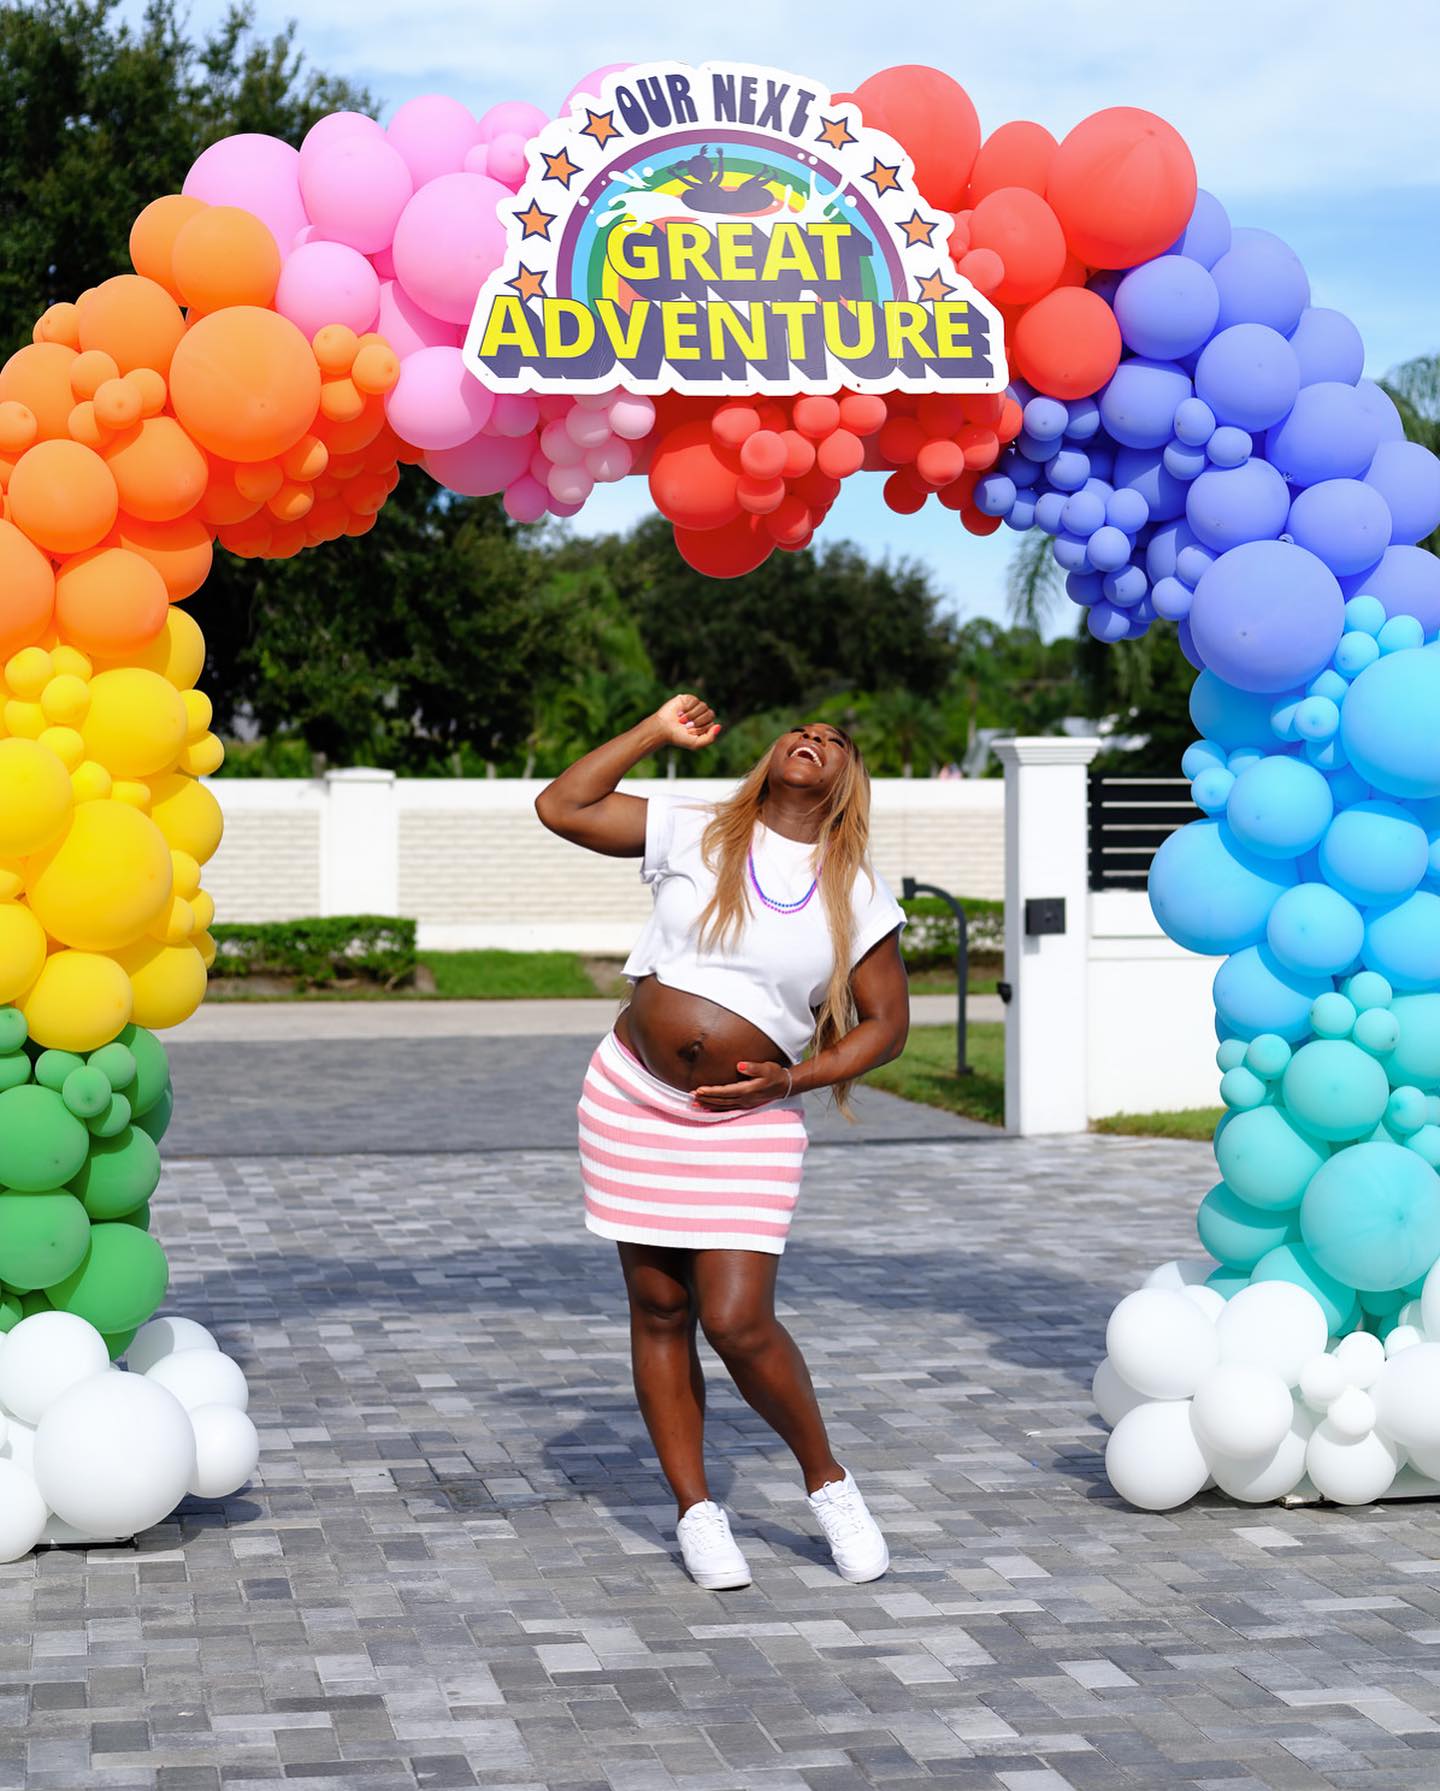 Serena Williams Shares Her Big Reveal! - Photo 1